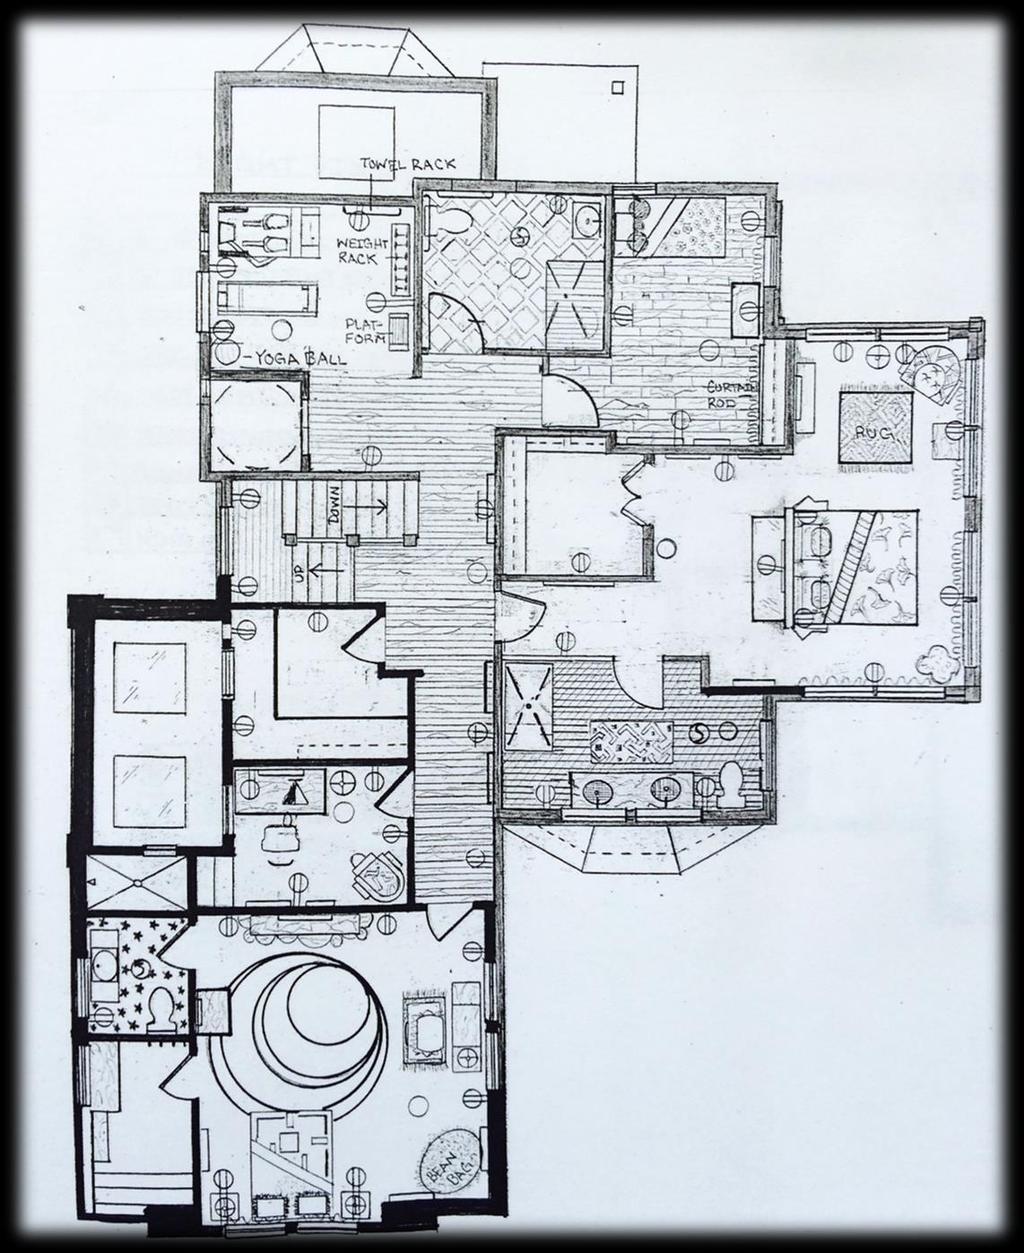 ELECTRICAL PLAN: LOWER LEVEL